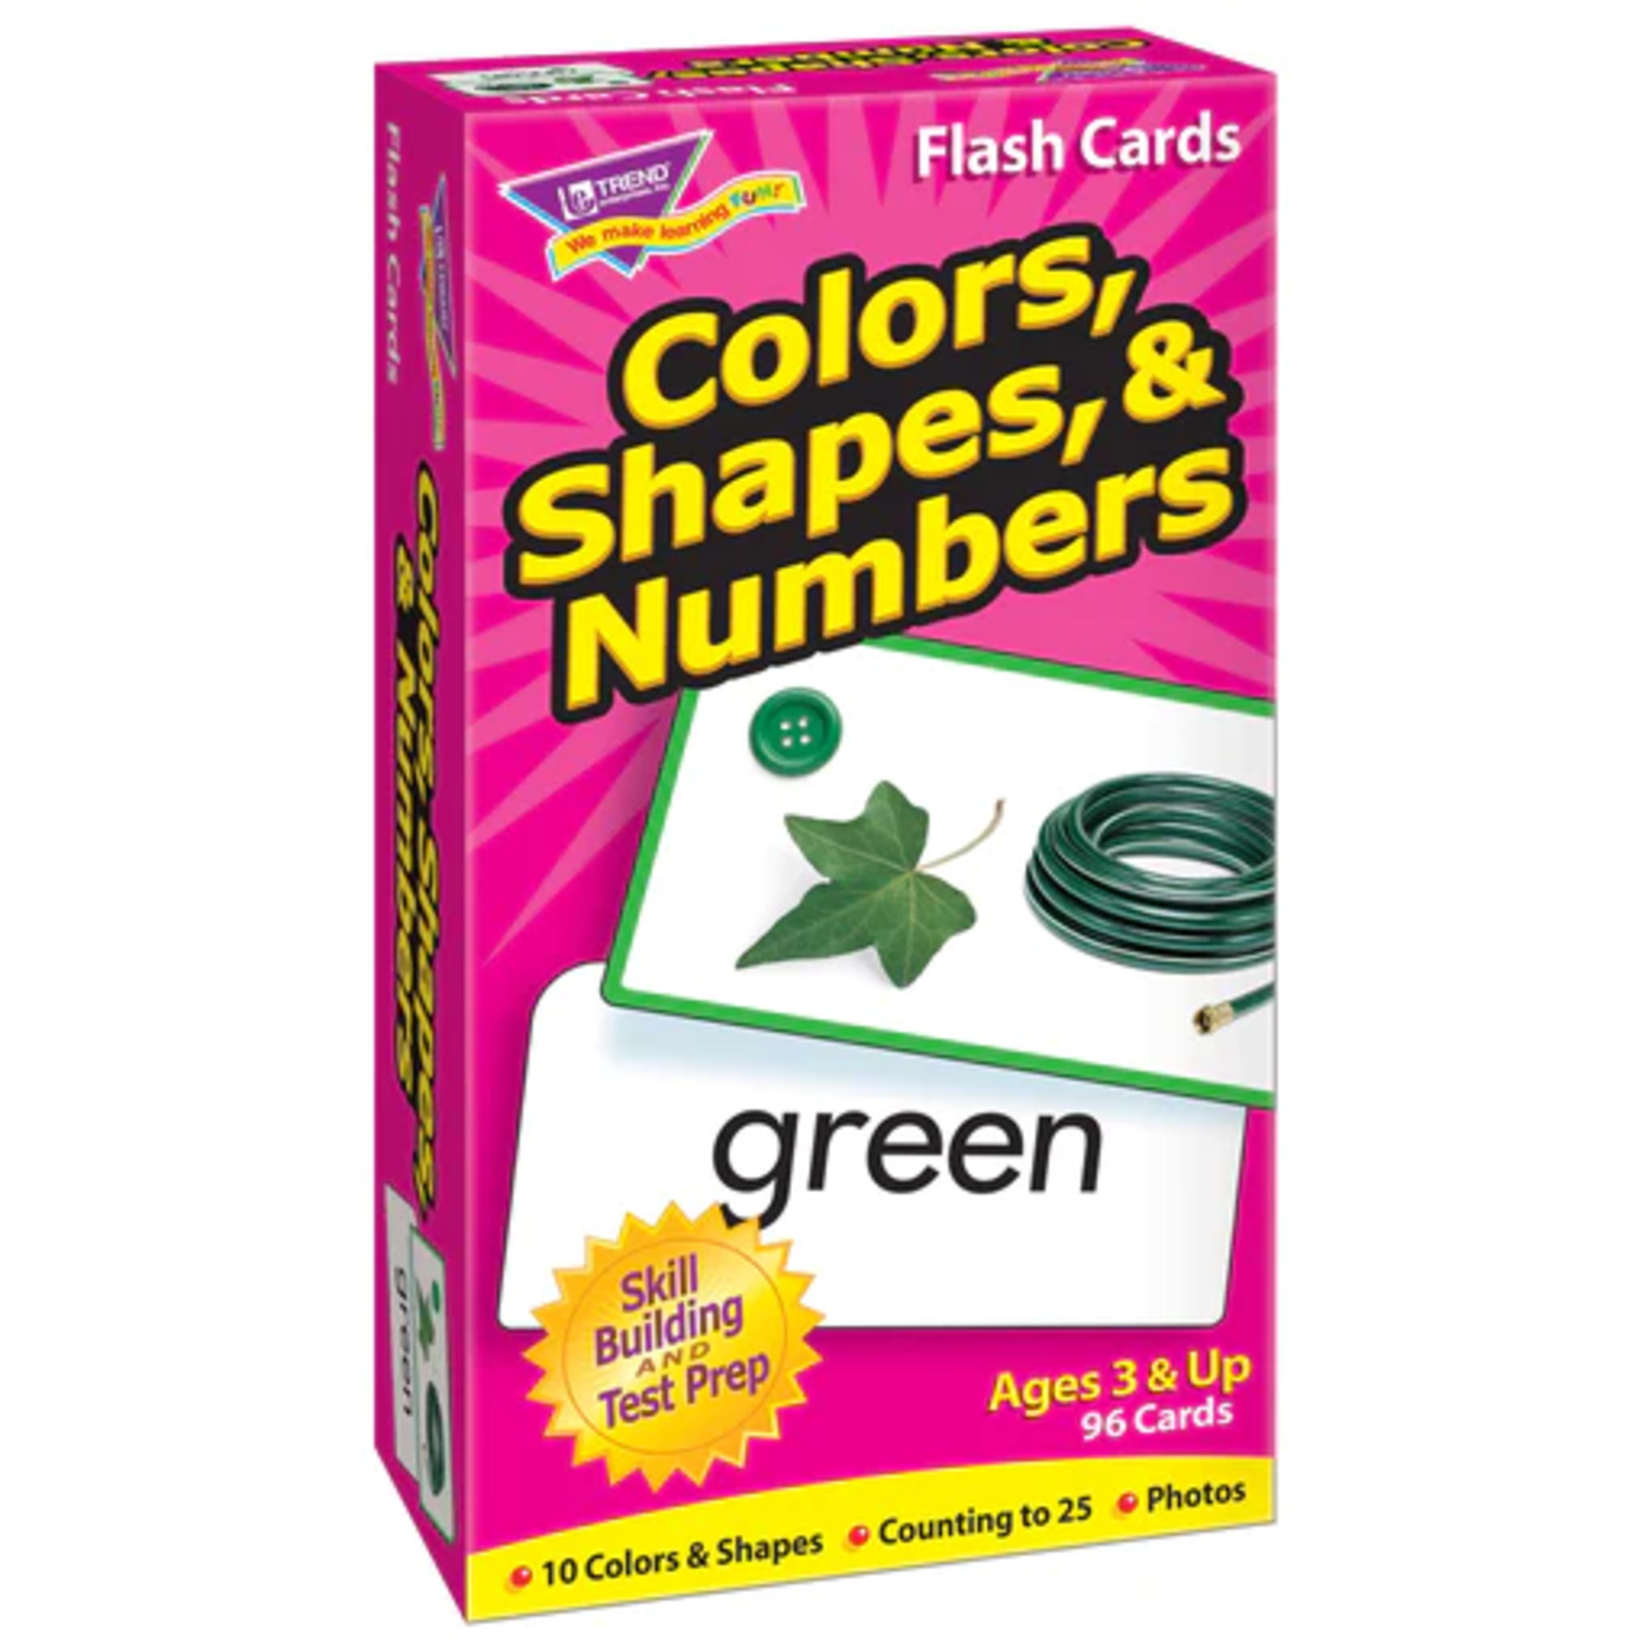 TREND ENTERPRISES INC Colors, Shapes, & Numbers Skill Drill Flash Cards